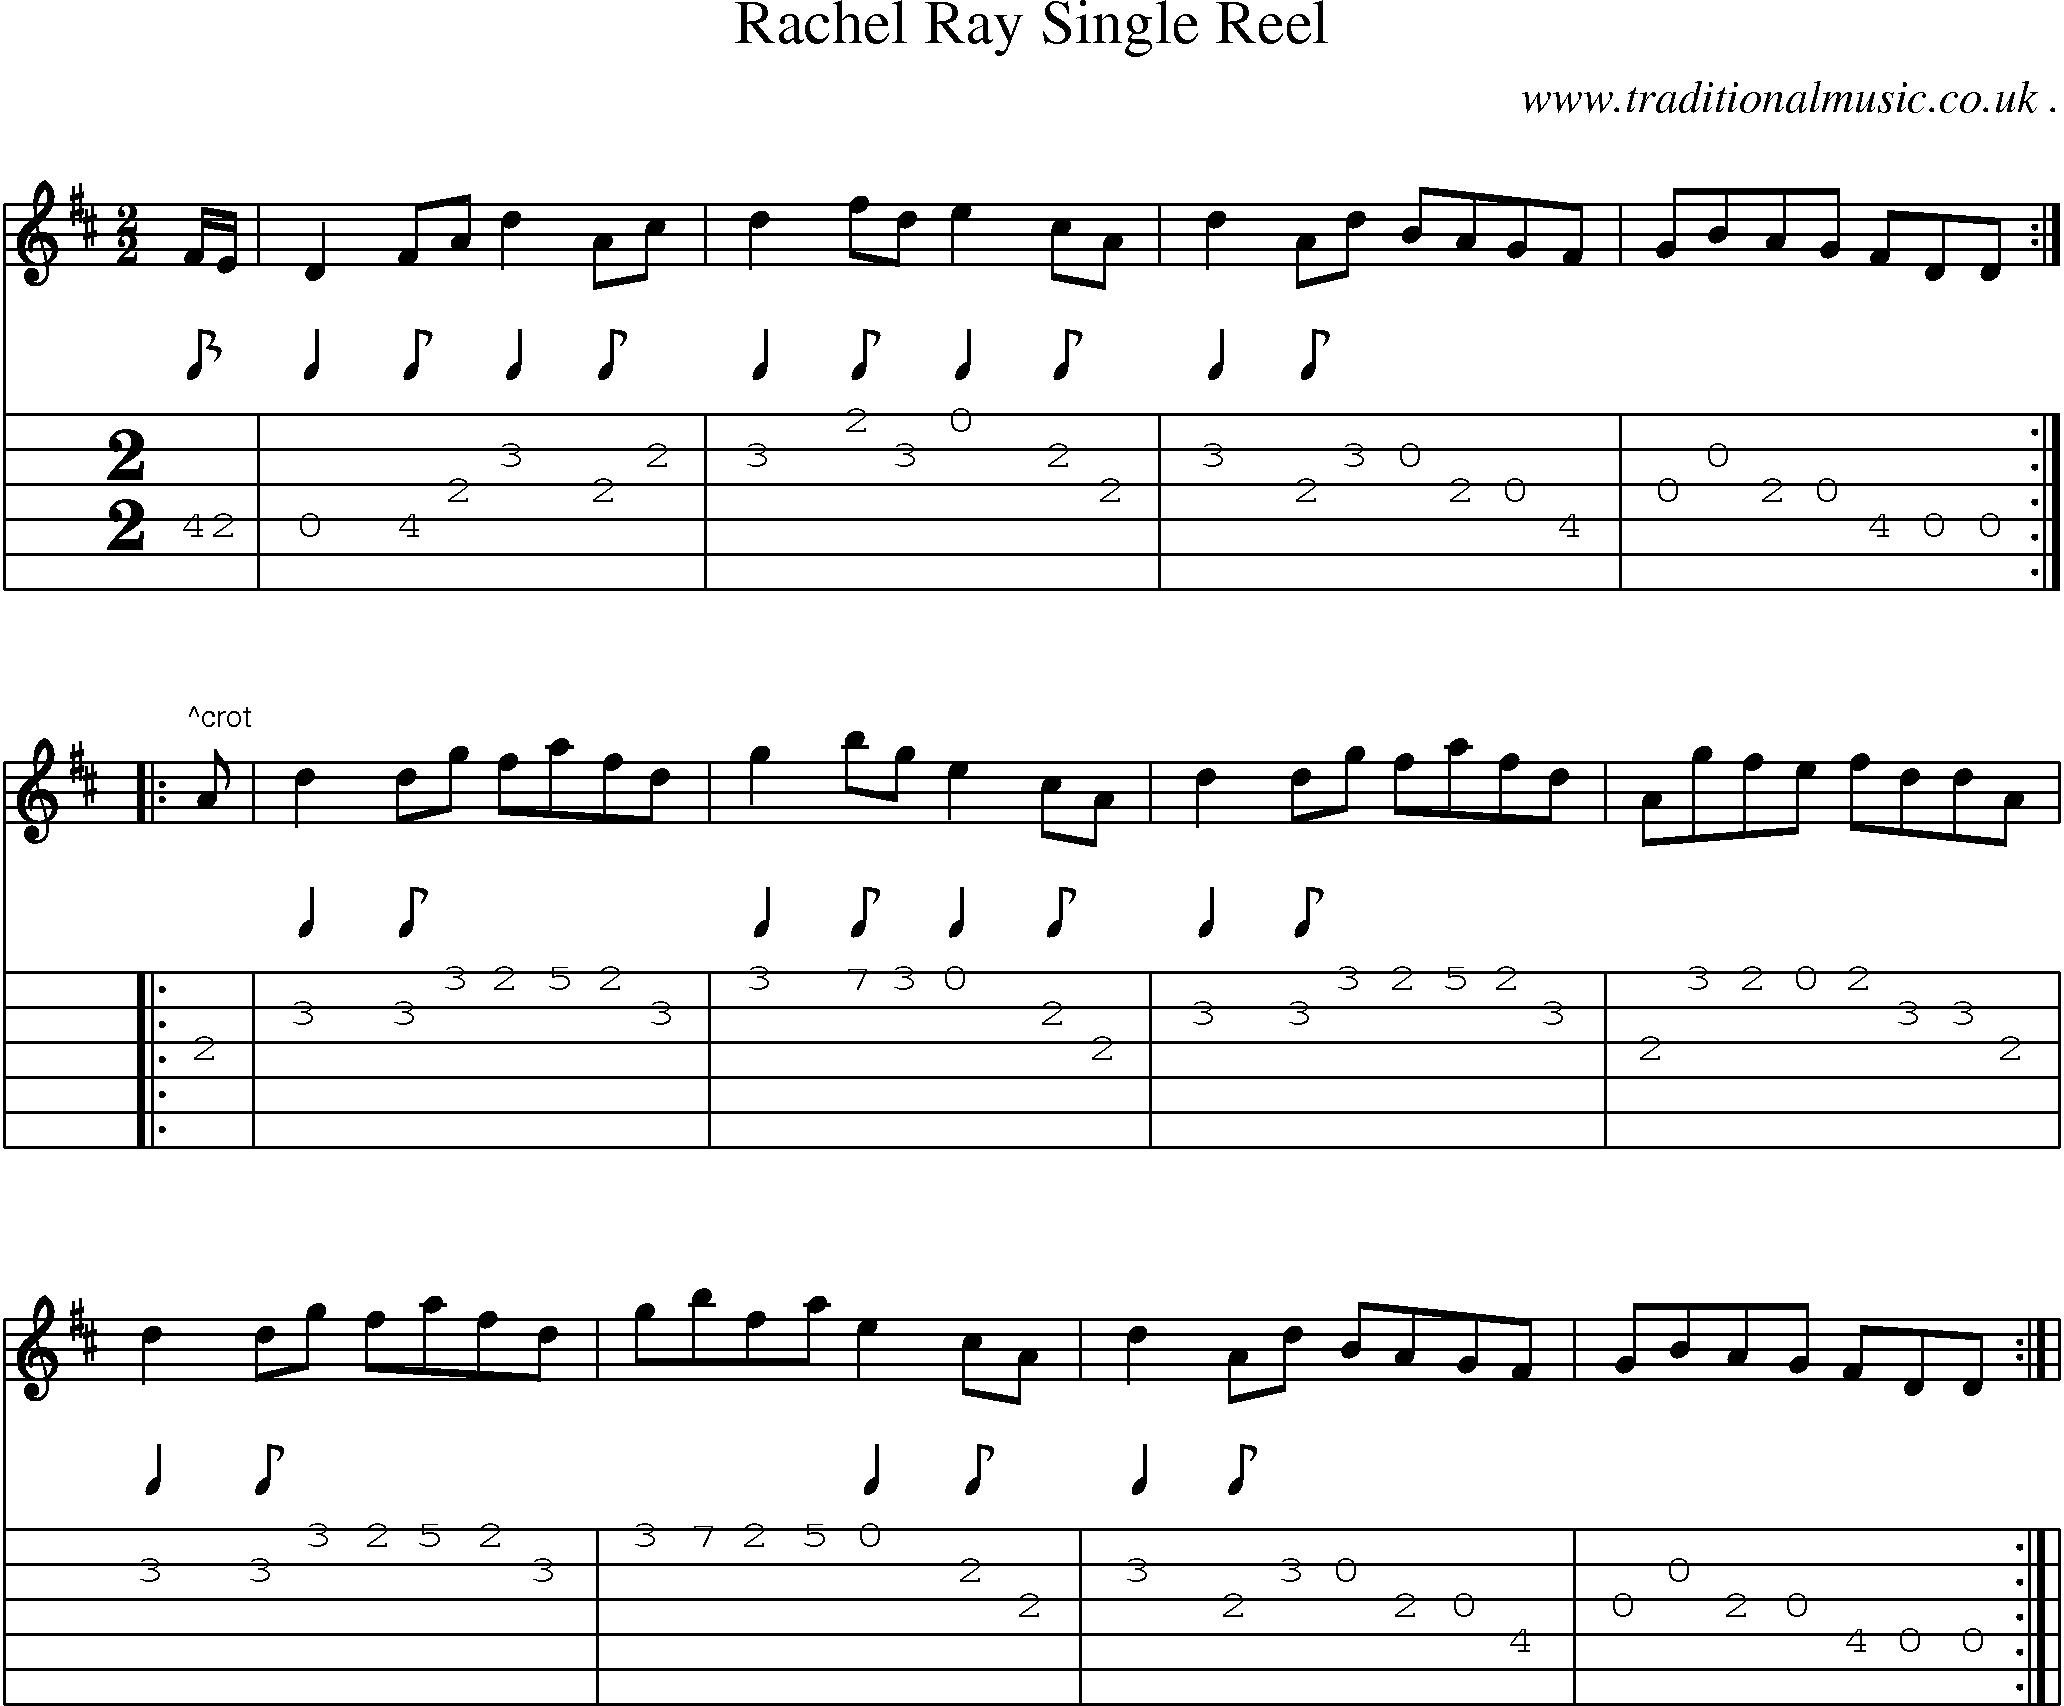 Sheet-Music and Guitar Tabs for Rachel Ray Single Reel